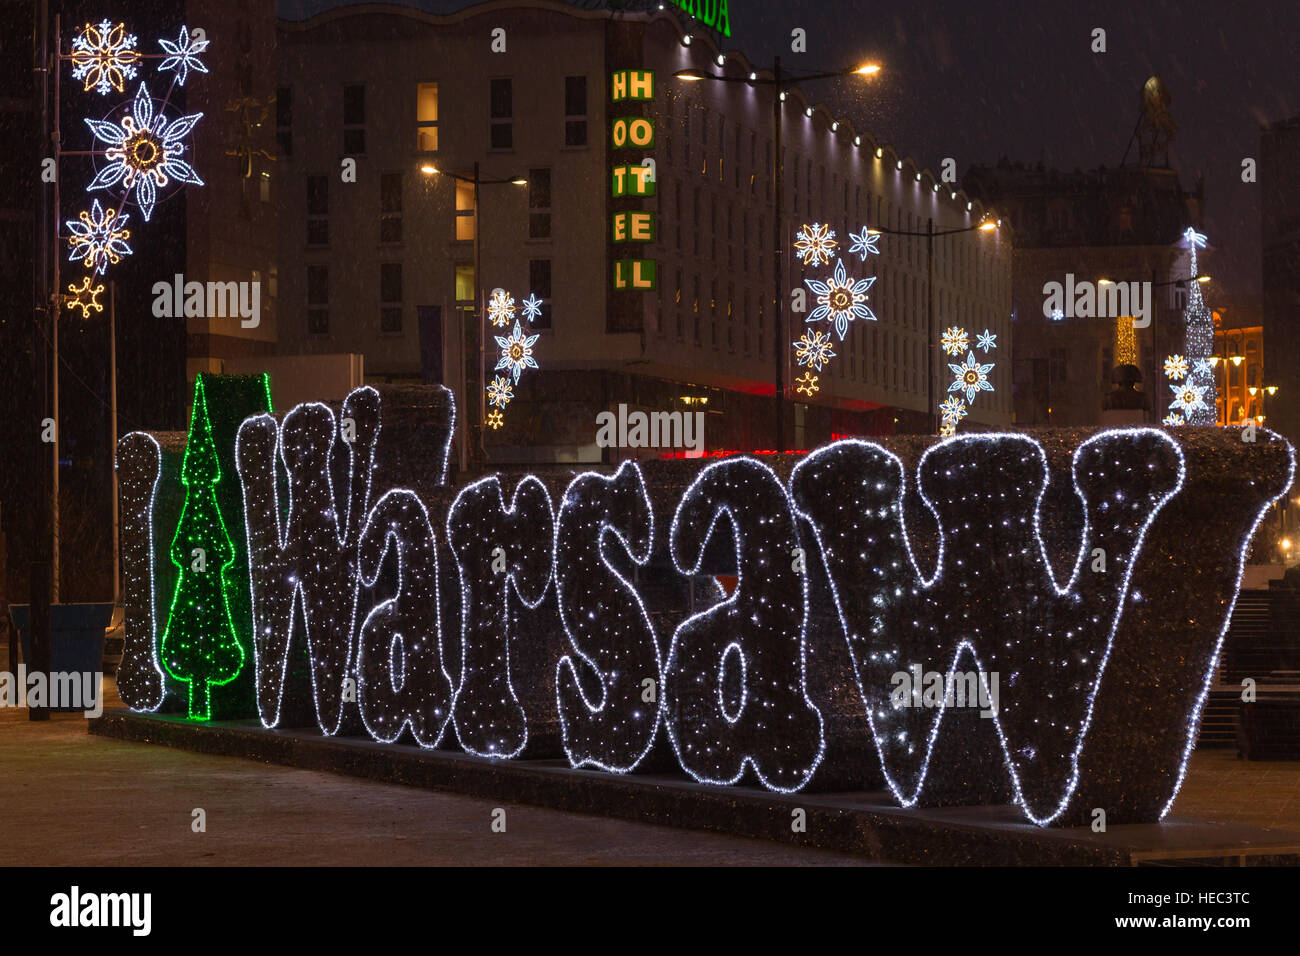 'I Love Warsaw' Christmas sign in Warsaw, Poland. Christmas sign during snowing. Stock Photo